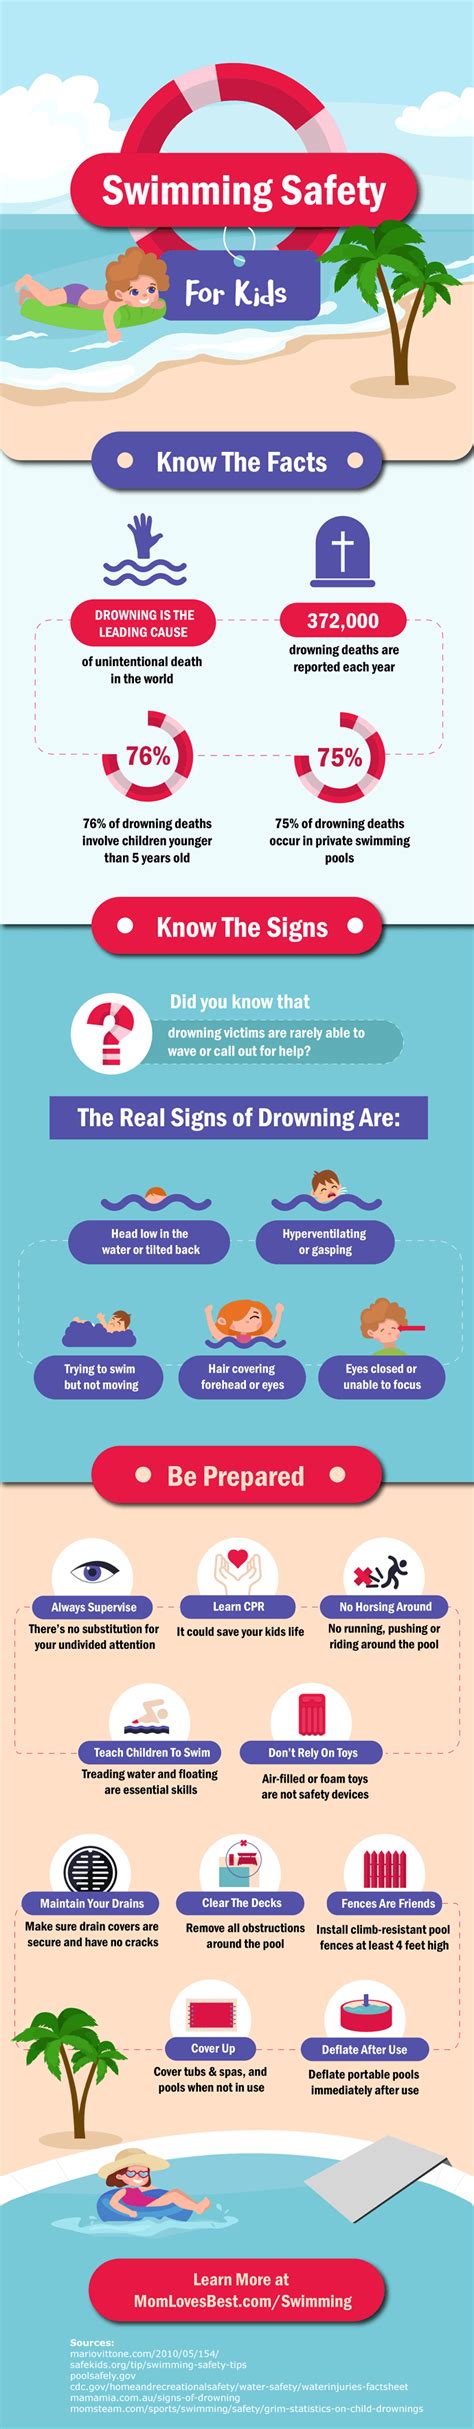 The Ultimate Guide To Swimming Safety For Kids